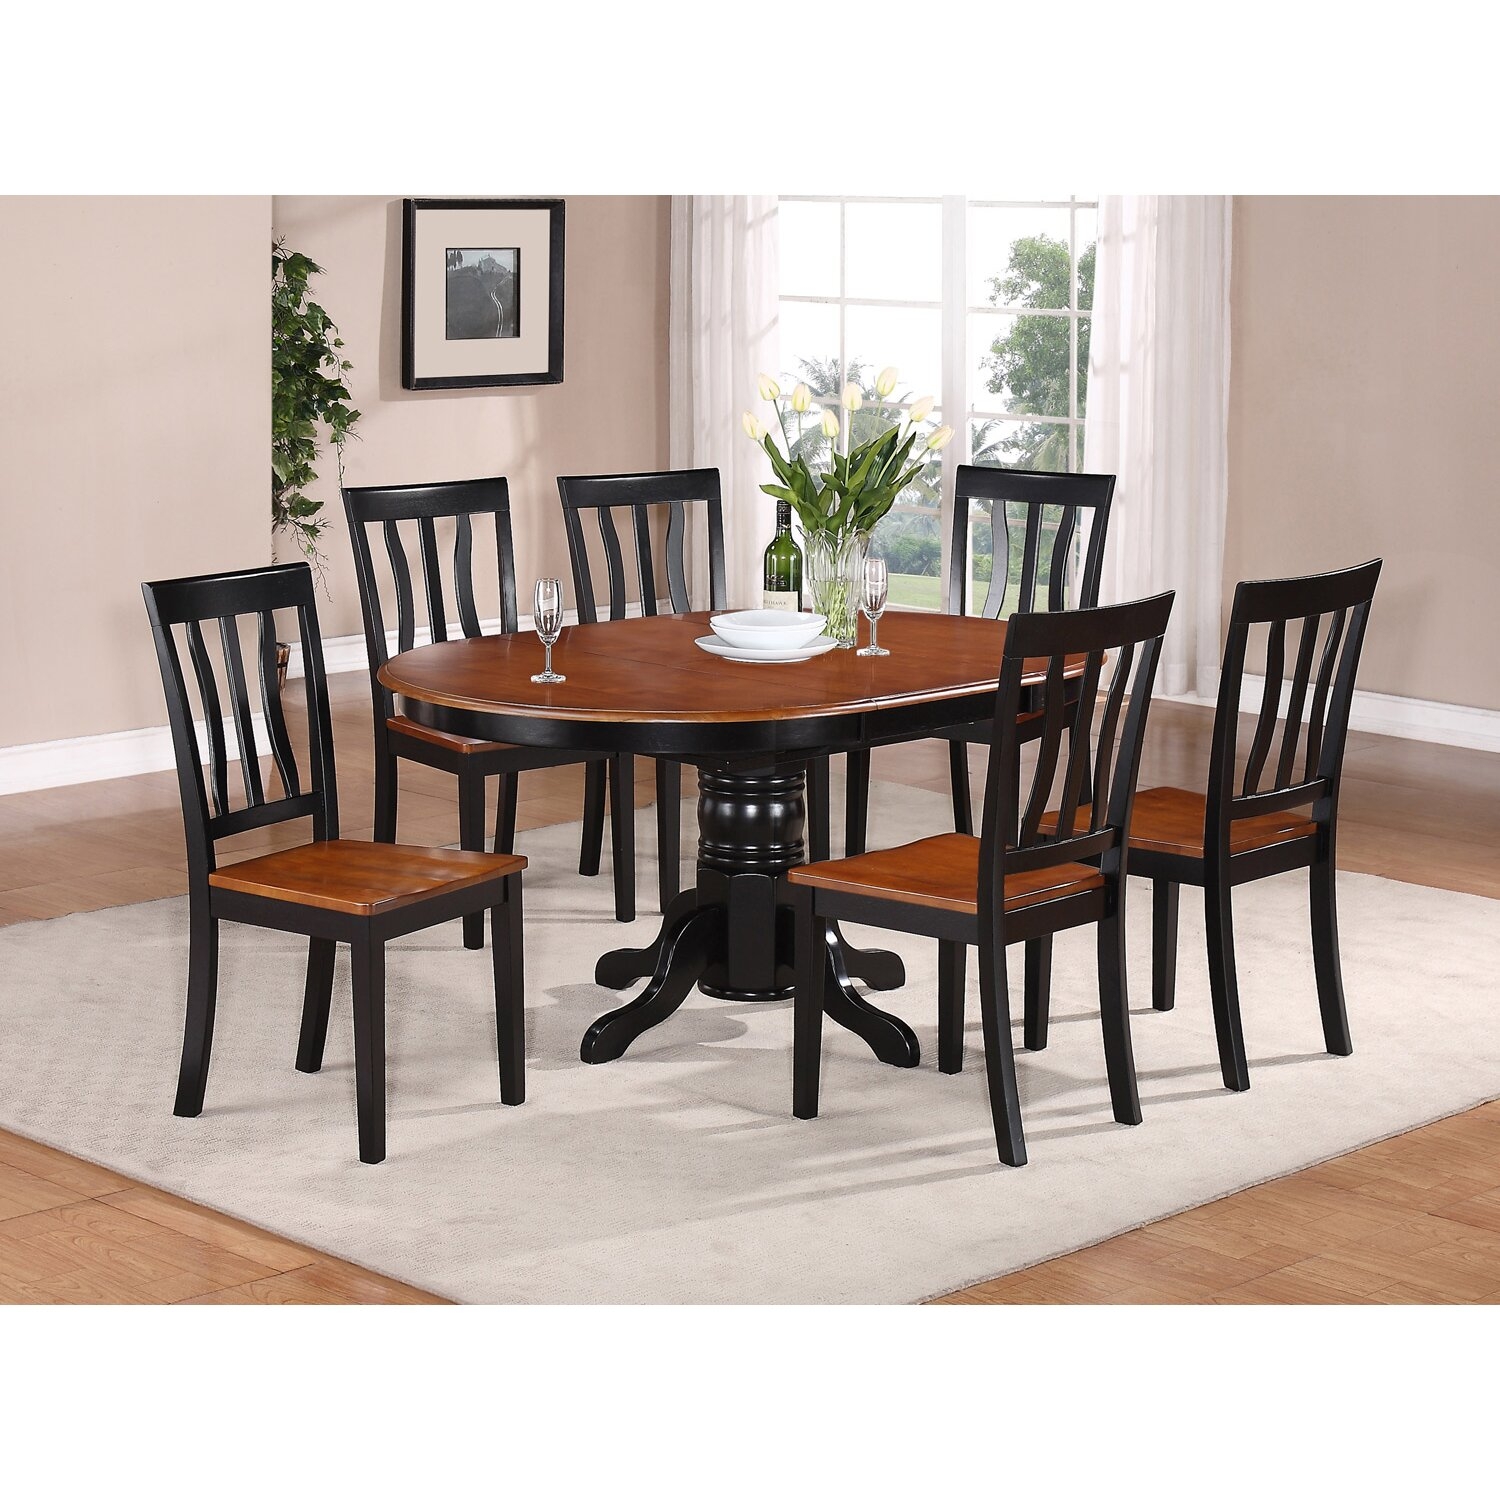 Oval Dining Table For 6 - Ideas on Foter